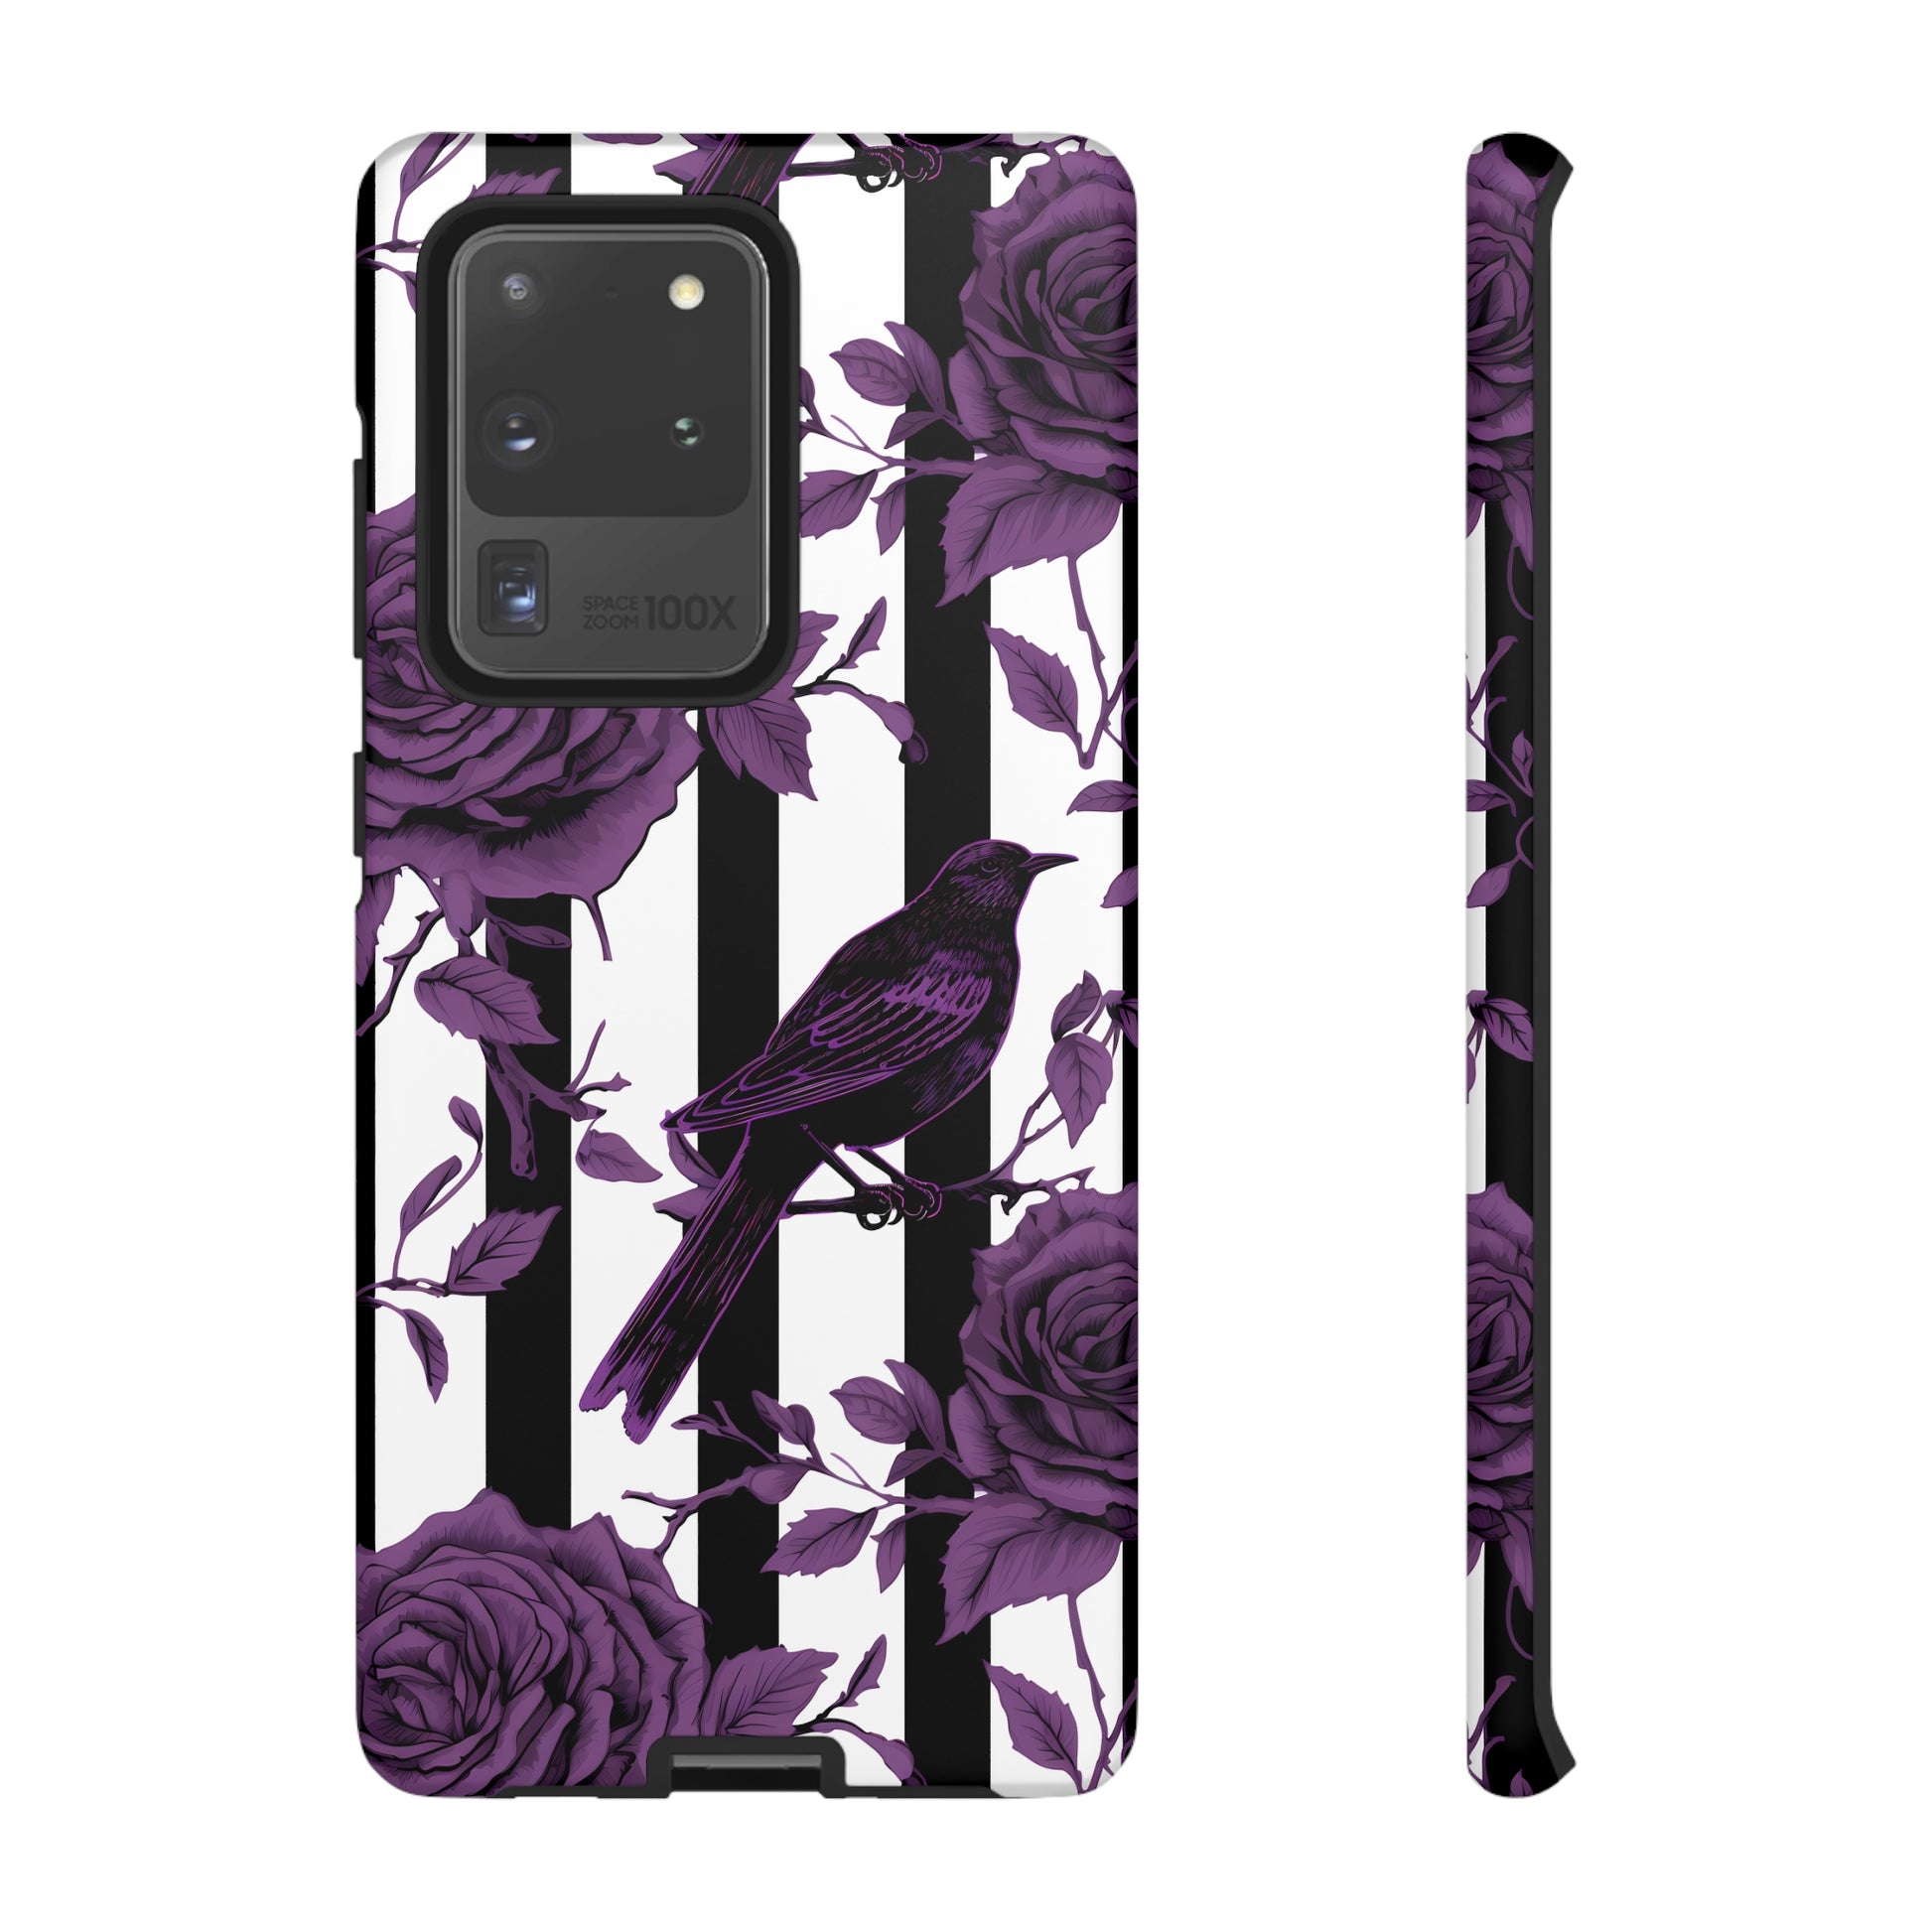 Striped Crows and Roses Tough Cases for iPhone Samsung Google PhonesPhone CaseVTZdesignsSamsung Galaxy S20 UltraMatteAccessoriescrowsGlossy